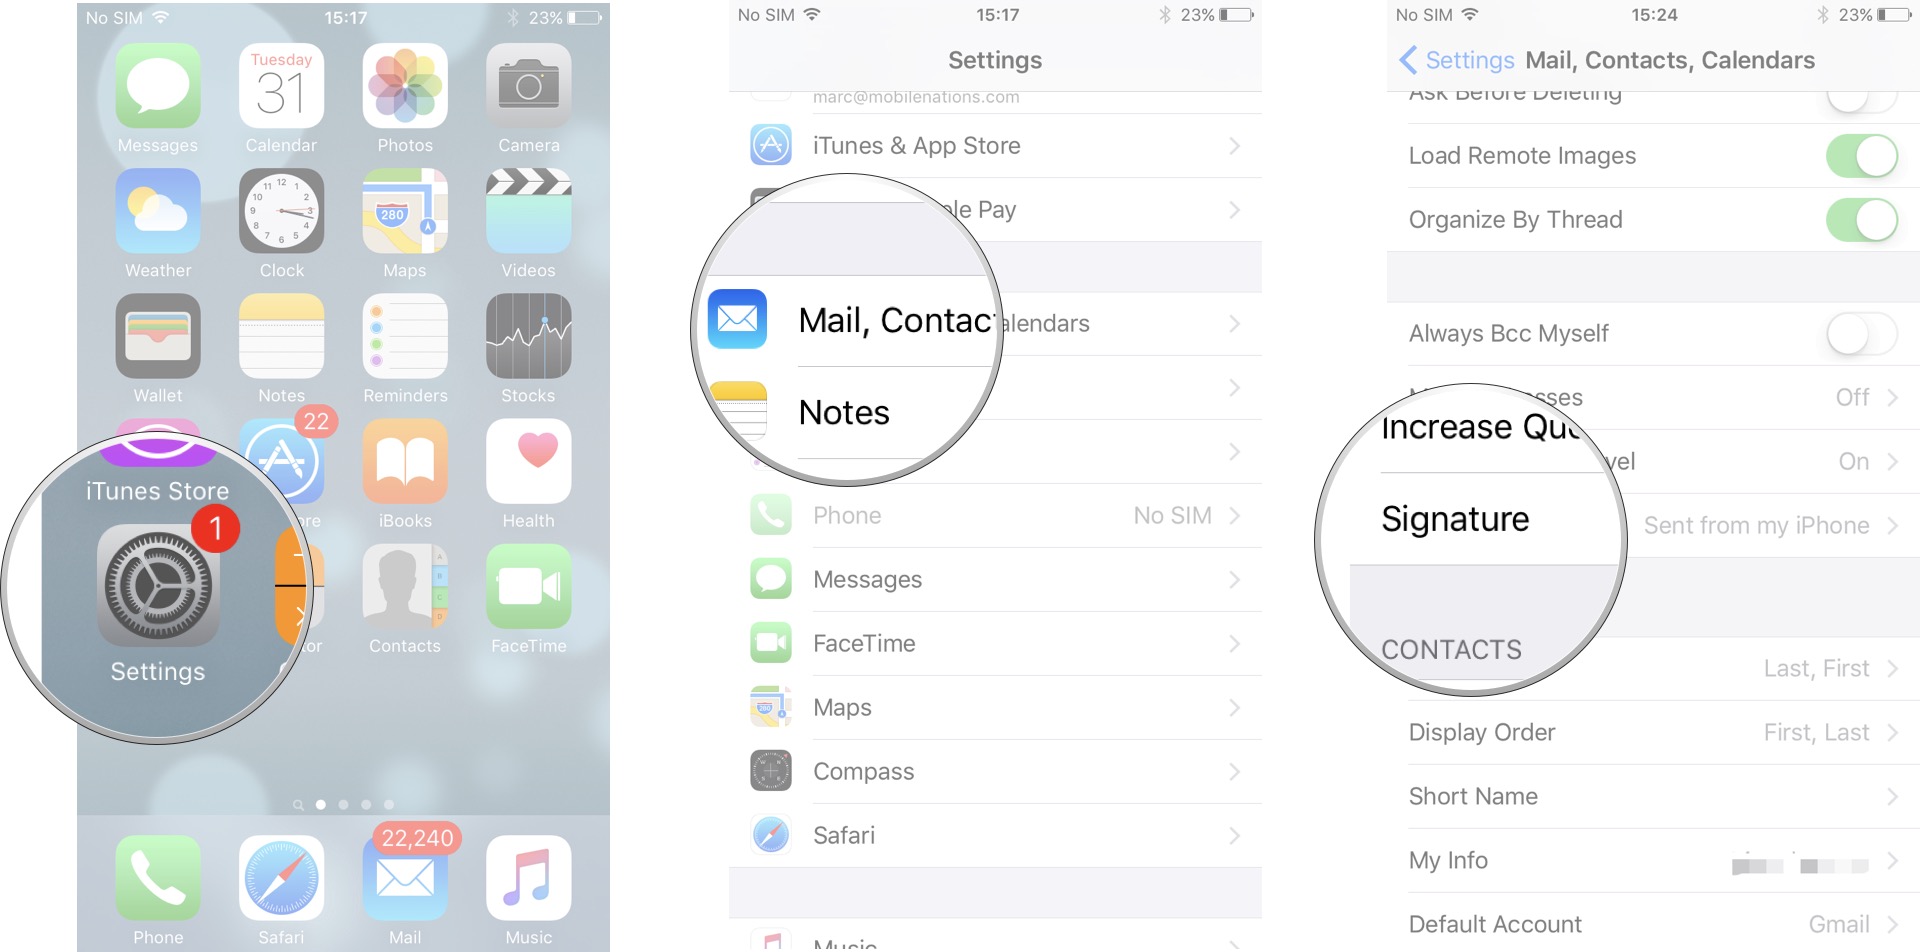 Launch Settings, Tap Mail, Contacts, Calendars, Tap Signature